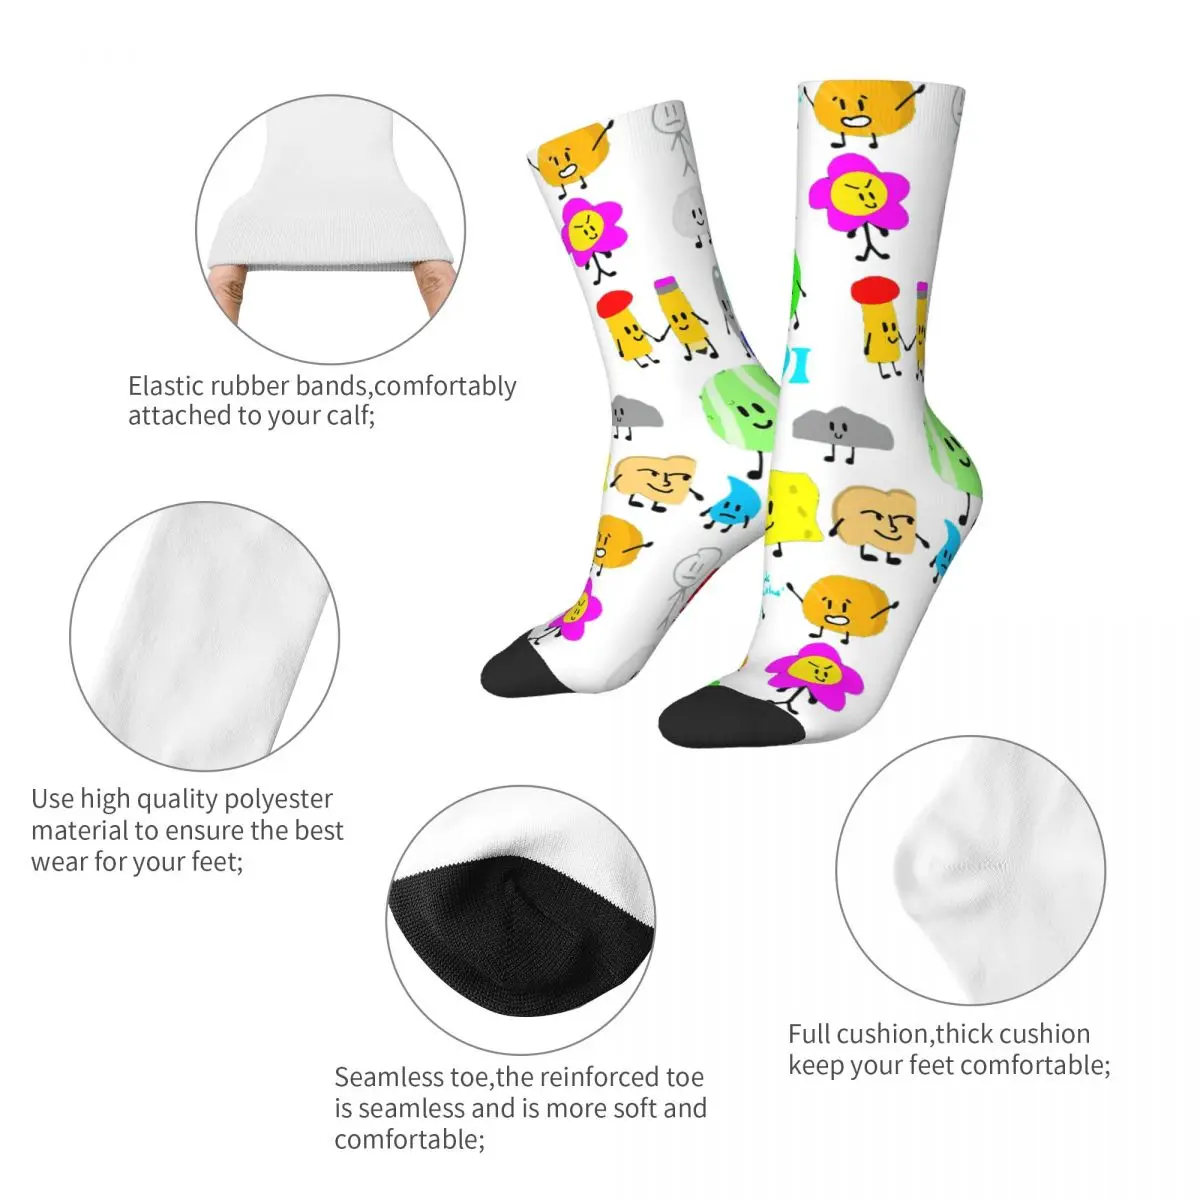 Hip Hop Retro Characters Essential Crazy Men's Socks Unisex Battle for Dream Island BFDI 4 and X Seamless Printed Crew Sock